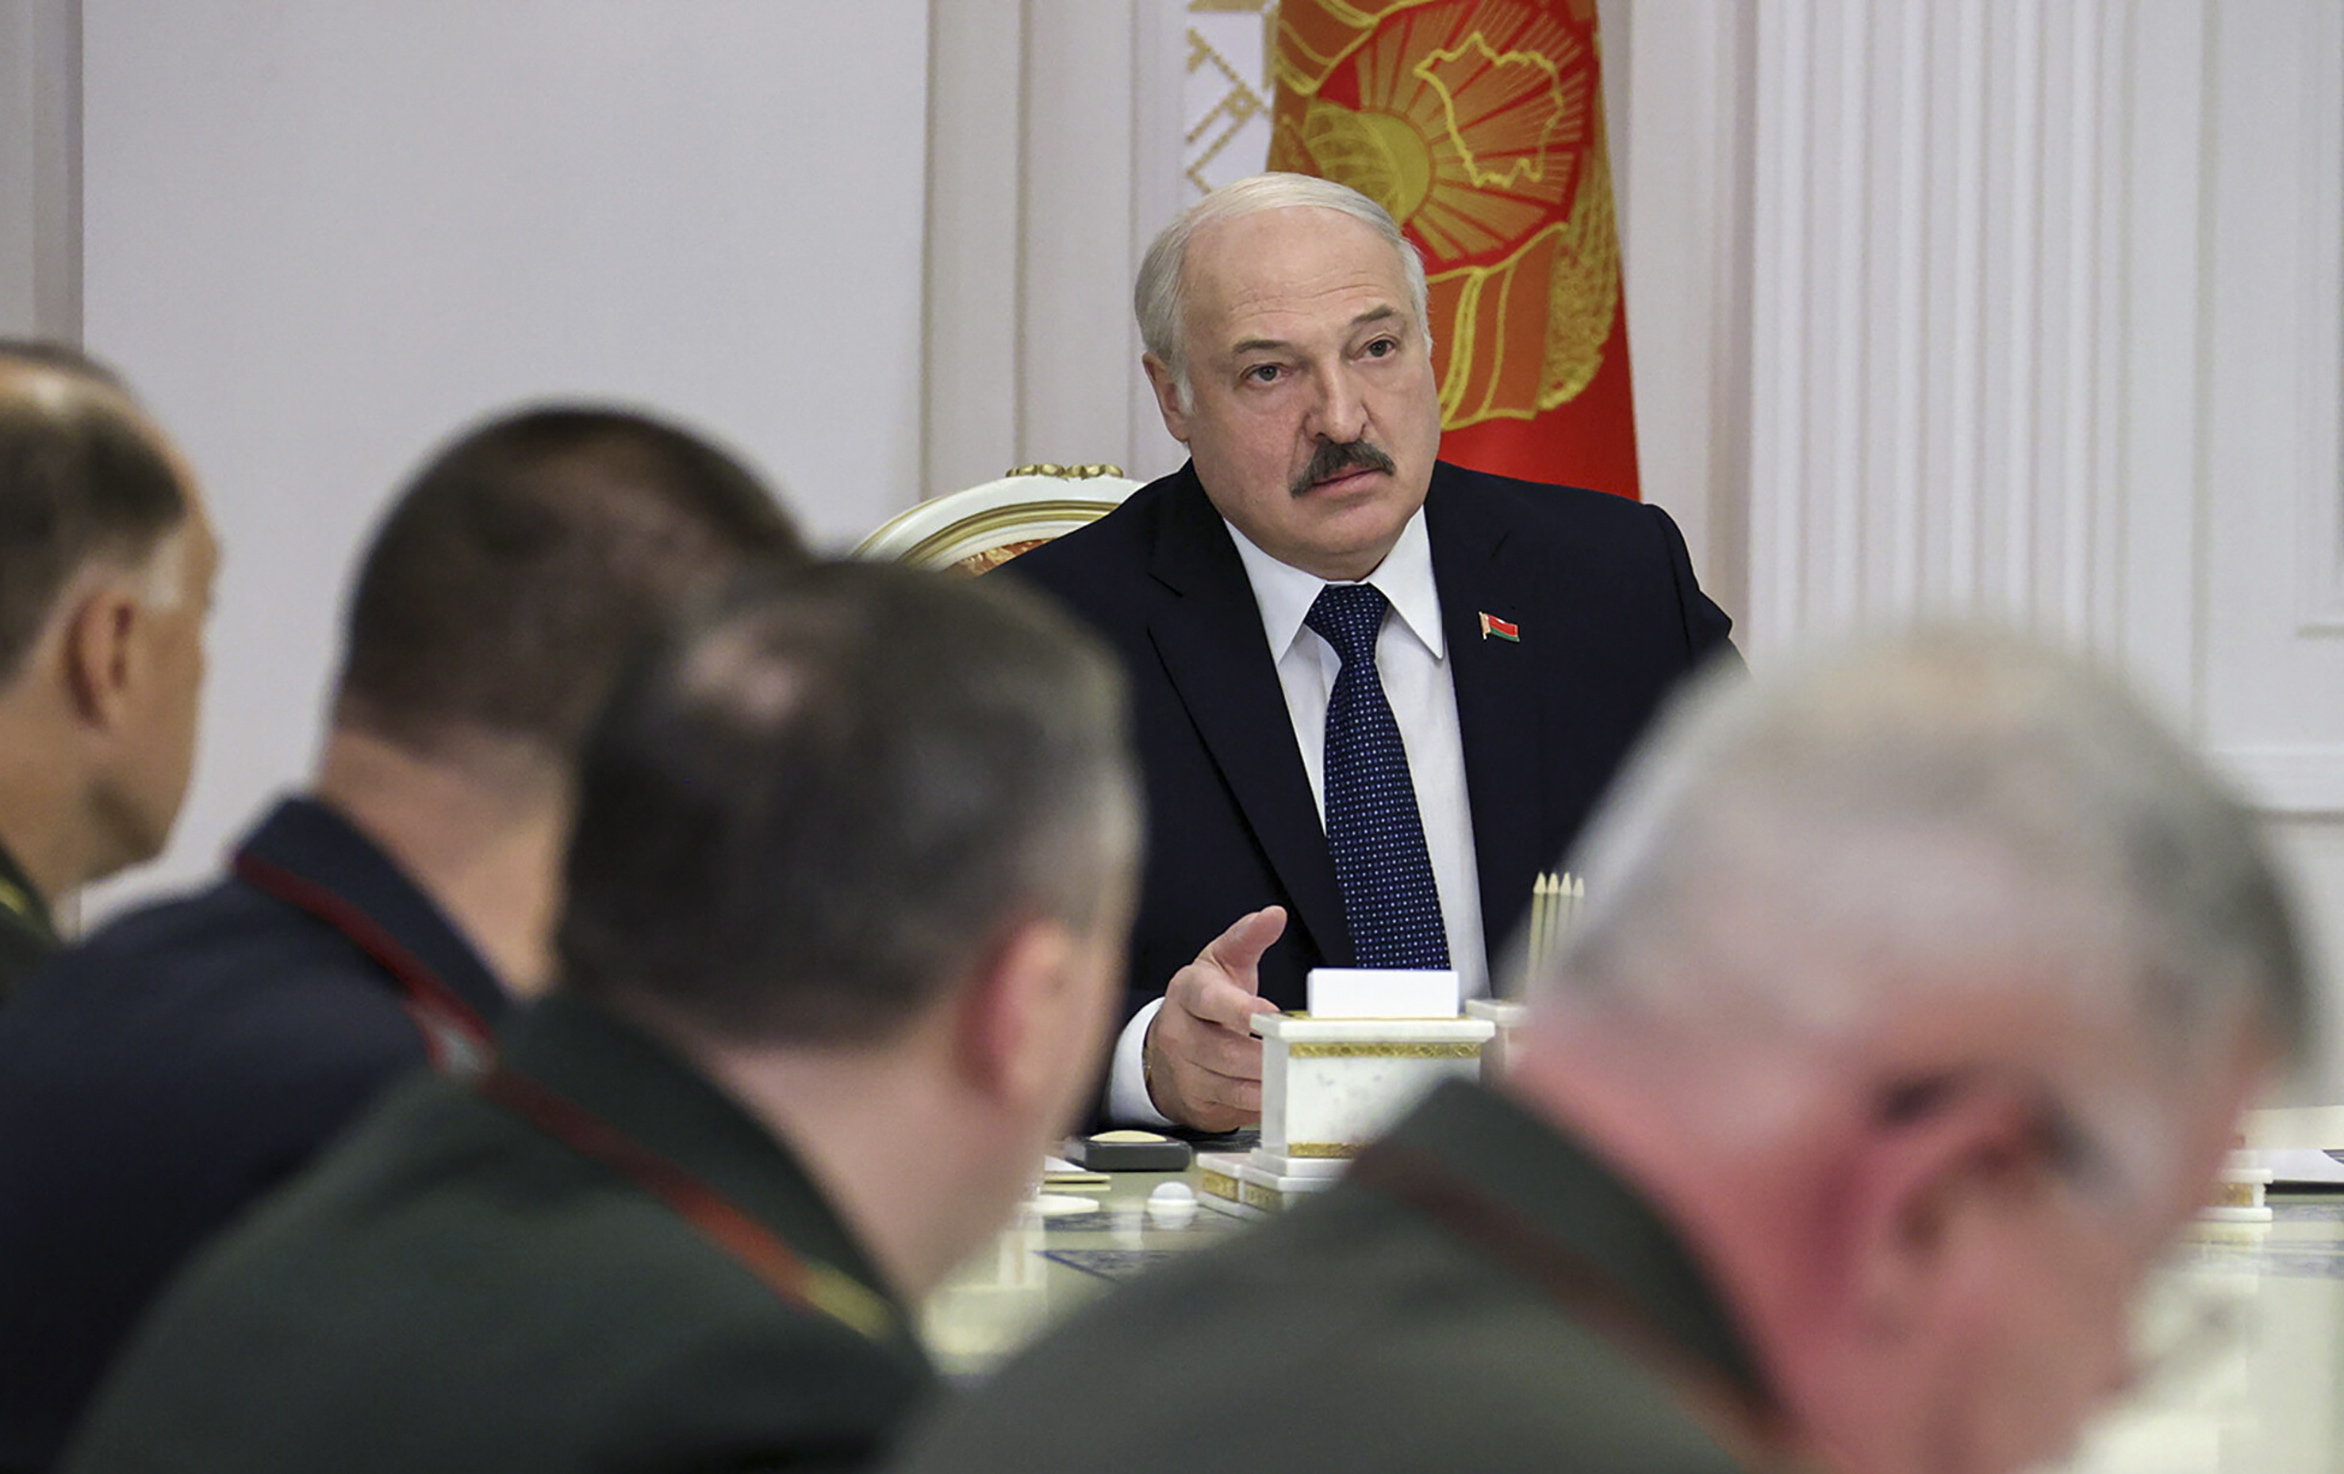 epa09585599 A handout photo made available by Belarus President Press service shows Belarusian President Aleksandr Lukashenko speaks during meeting to discuss situation at Belarus' state border in Minsk, Belarus, 16 November 2021. Asylum-seekers, refugees and migrants from the Middle East clashed with Polish Police forces at Belarusian-Polish checkpoint of Bruzgi-Kuznica trying to forcly enter into Polish territory. Thousands people who want to obtain asylum in the European Union have been trapped at low temperatures at the border since 08 November.  EPA/BELARUS PRESIDENT PRESS SERVICE / HANDOUT  HANDOUT EDITORIAL USE ONLY/NO SALES